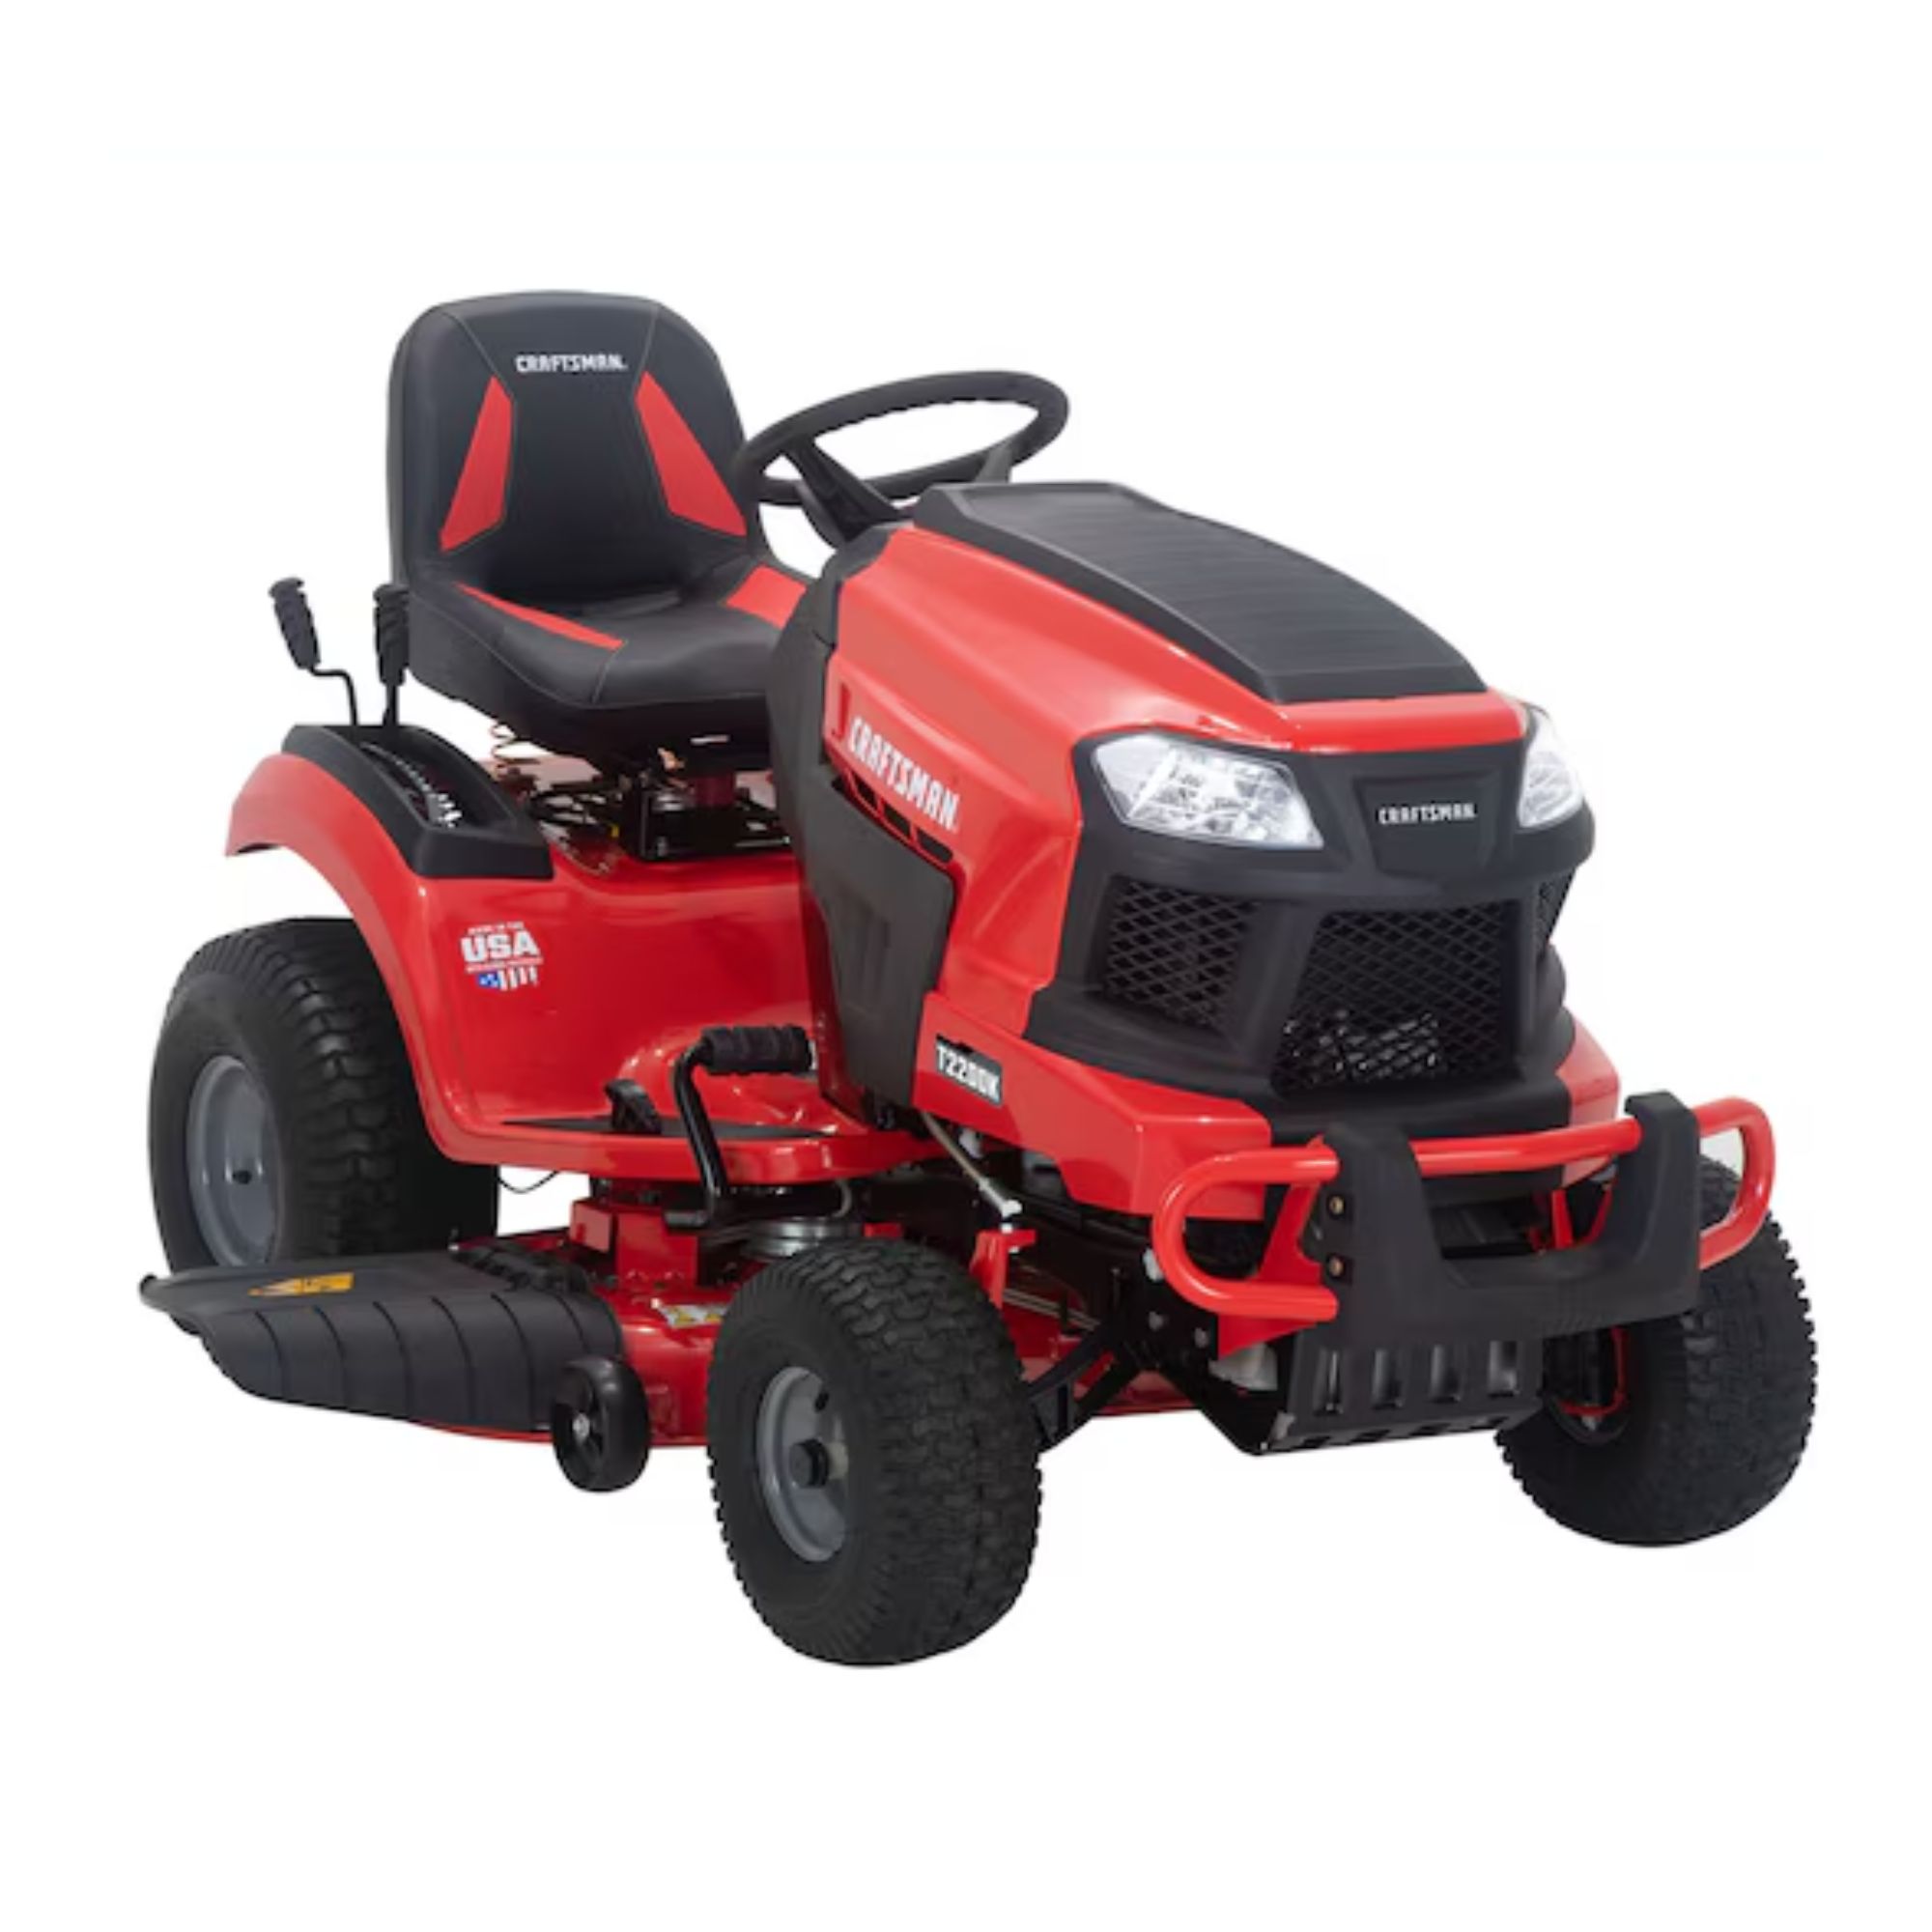 A CRAFTSMAN Z5400 46-in riding mower